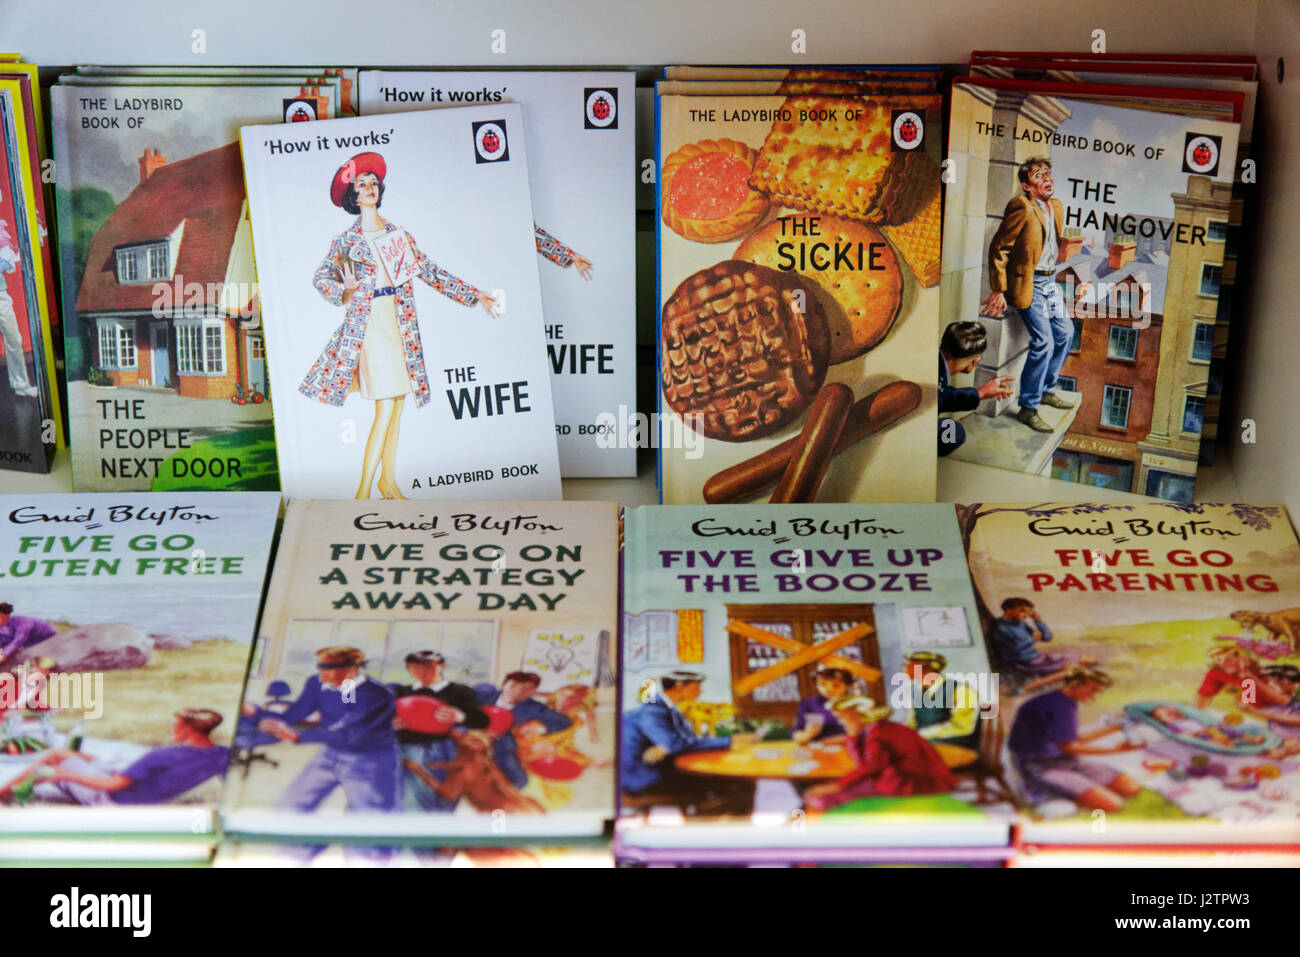 Spoof Famous Five and Ladybird Books titles, including Five Go Gluten Free and Five Go Parenting and the Ladybird book of The Hangover and The Sickie. Stock Photo